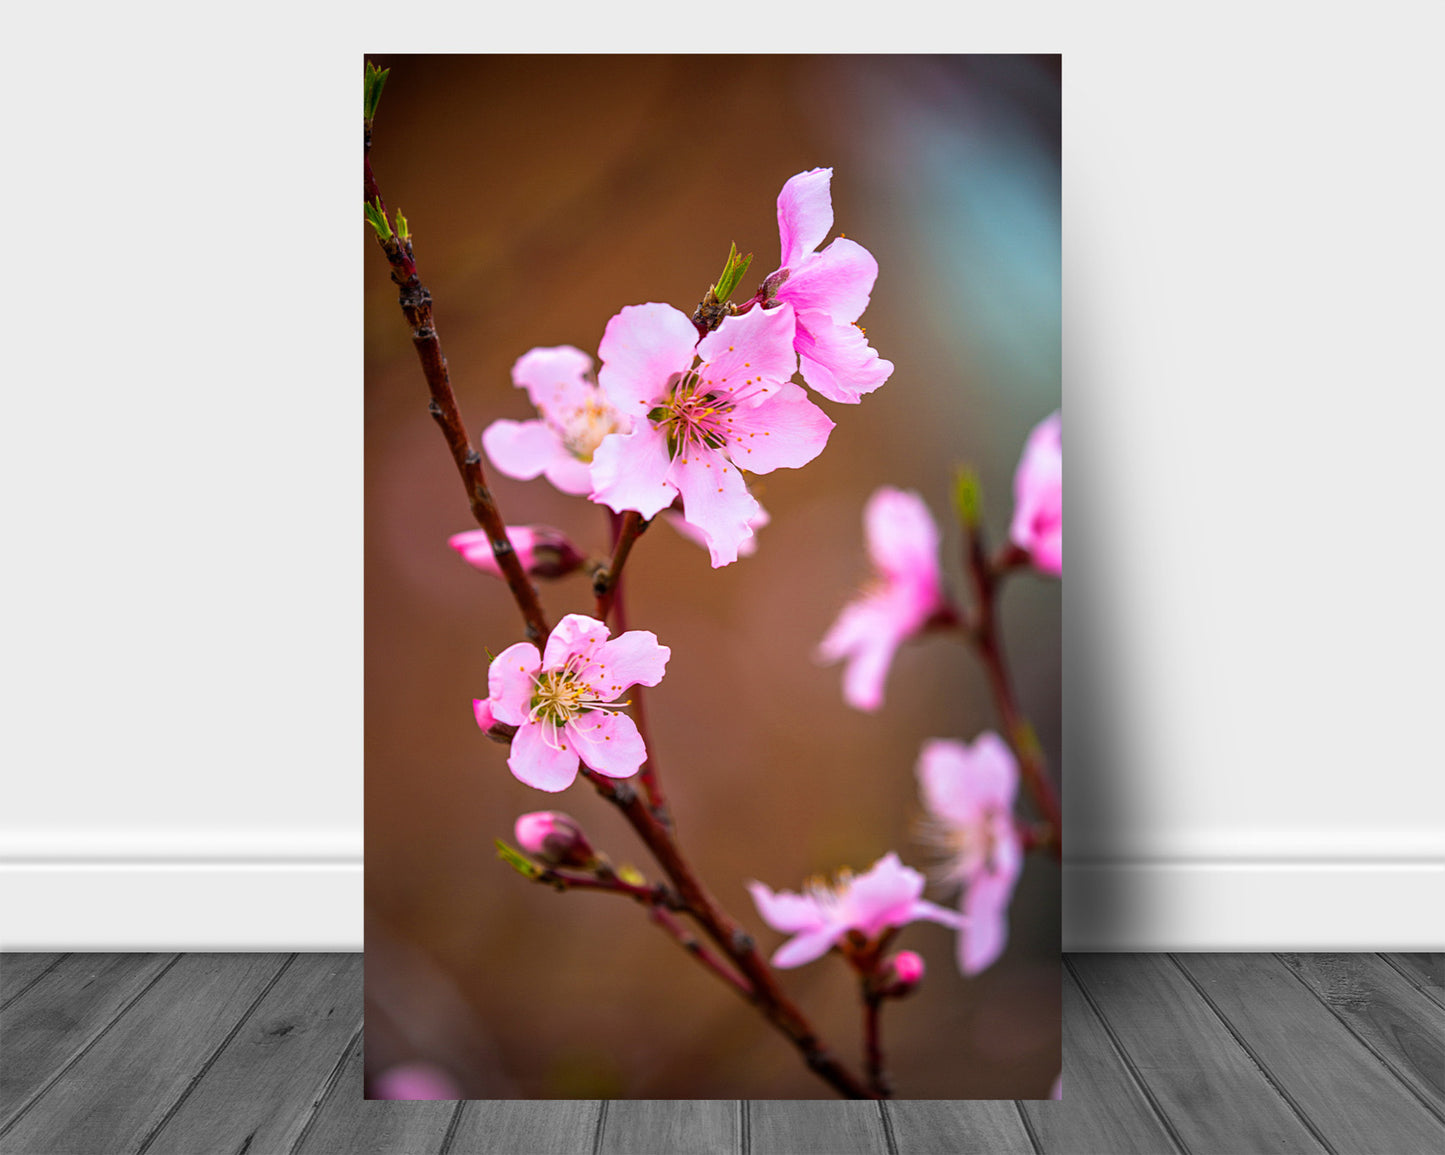 Vertical floral metal print on aluminum of pink peach blossoms on a spring day in Oklahoma by Sean Ramsey of Southern Plains Photography.